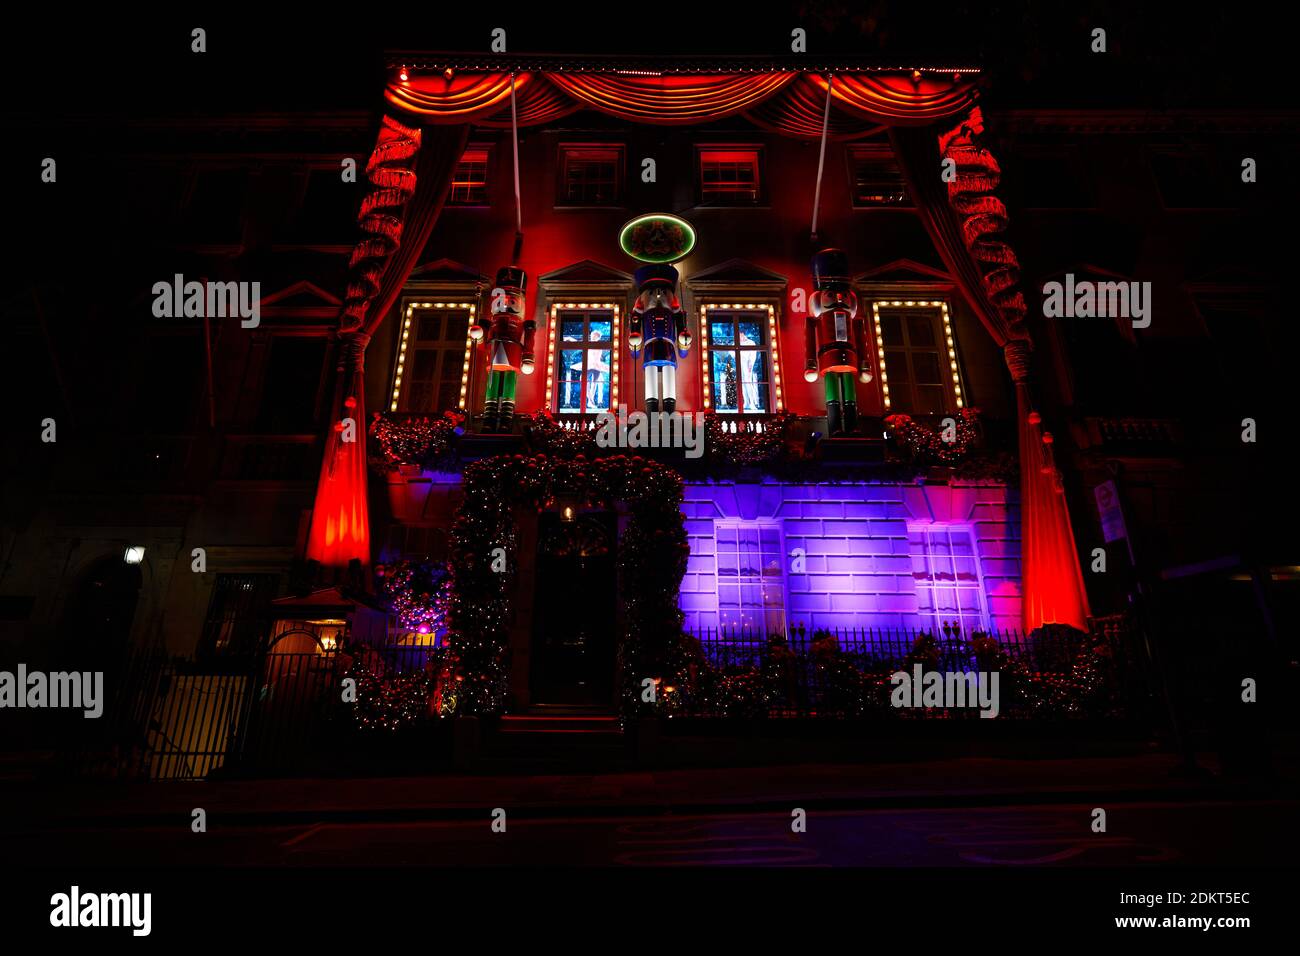 London, UK. - 15 Dec 2020: The front of Annabel's nightcub in Mayfair, decorated in a Nutcracker themed display for Christmas 2020. Stock Photo